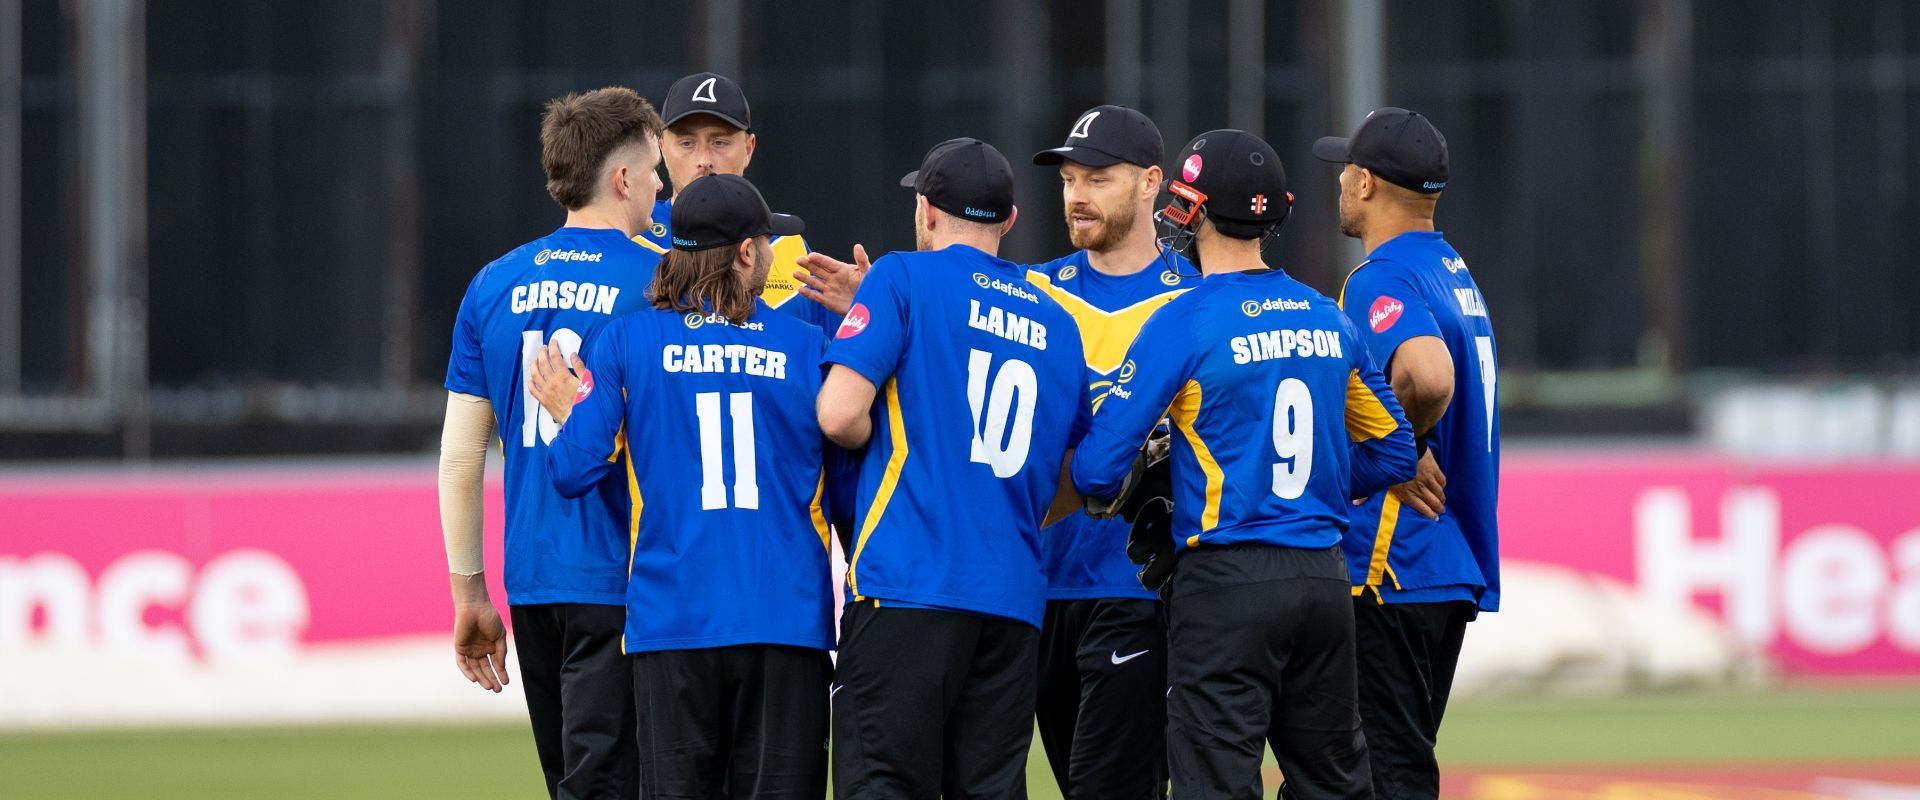 Sharks celebrate a wicket at Hove